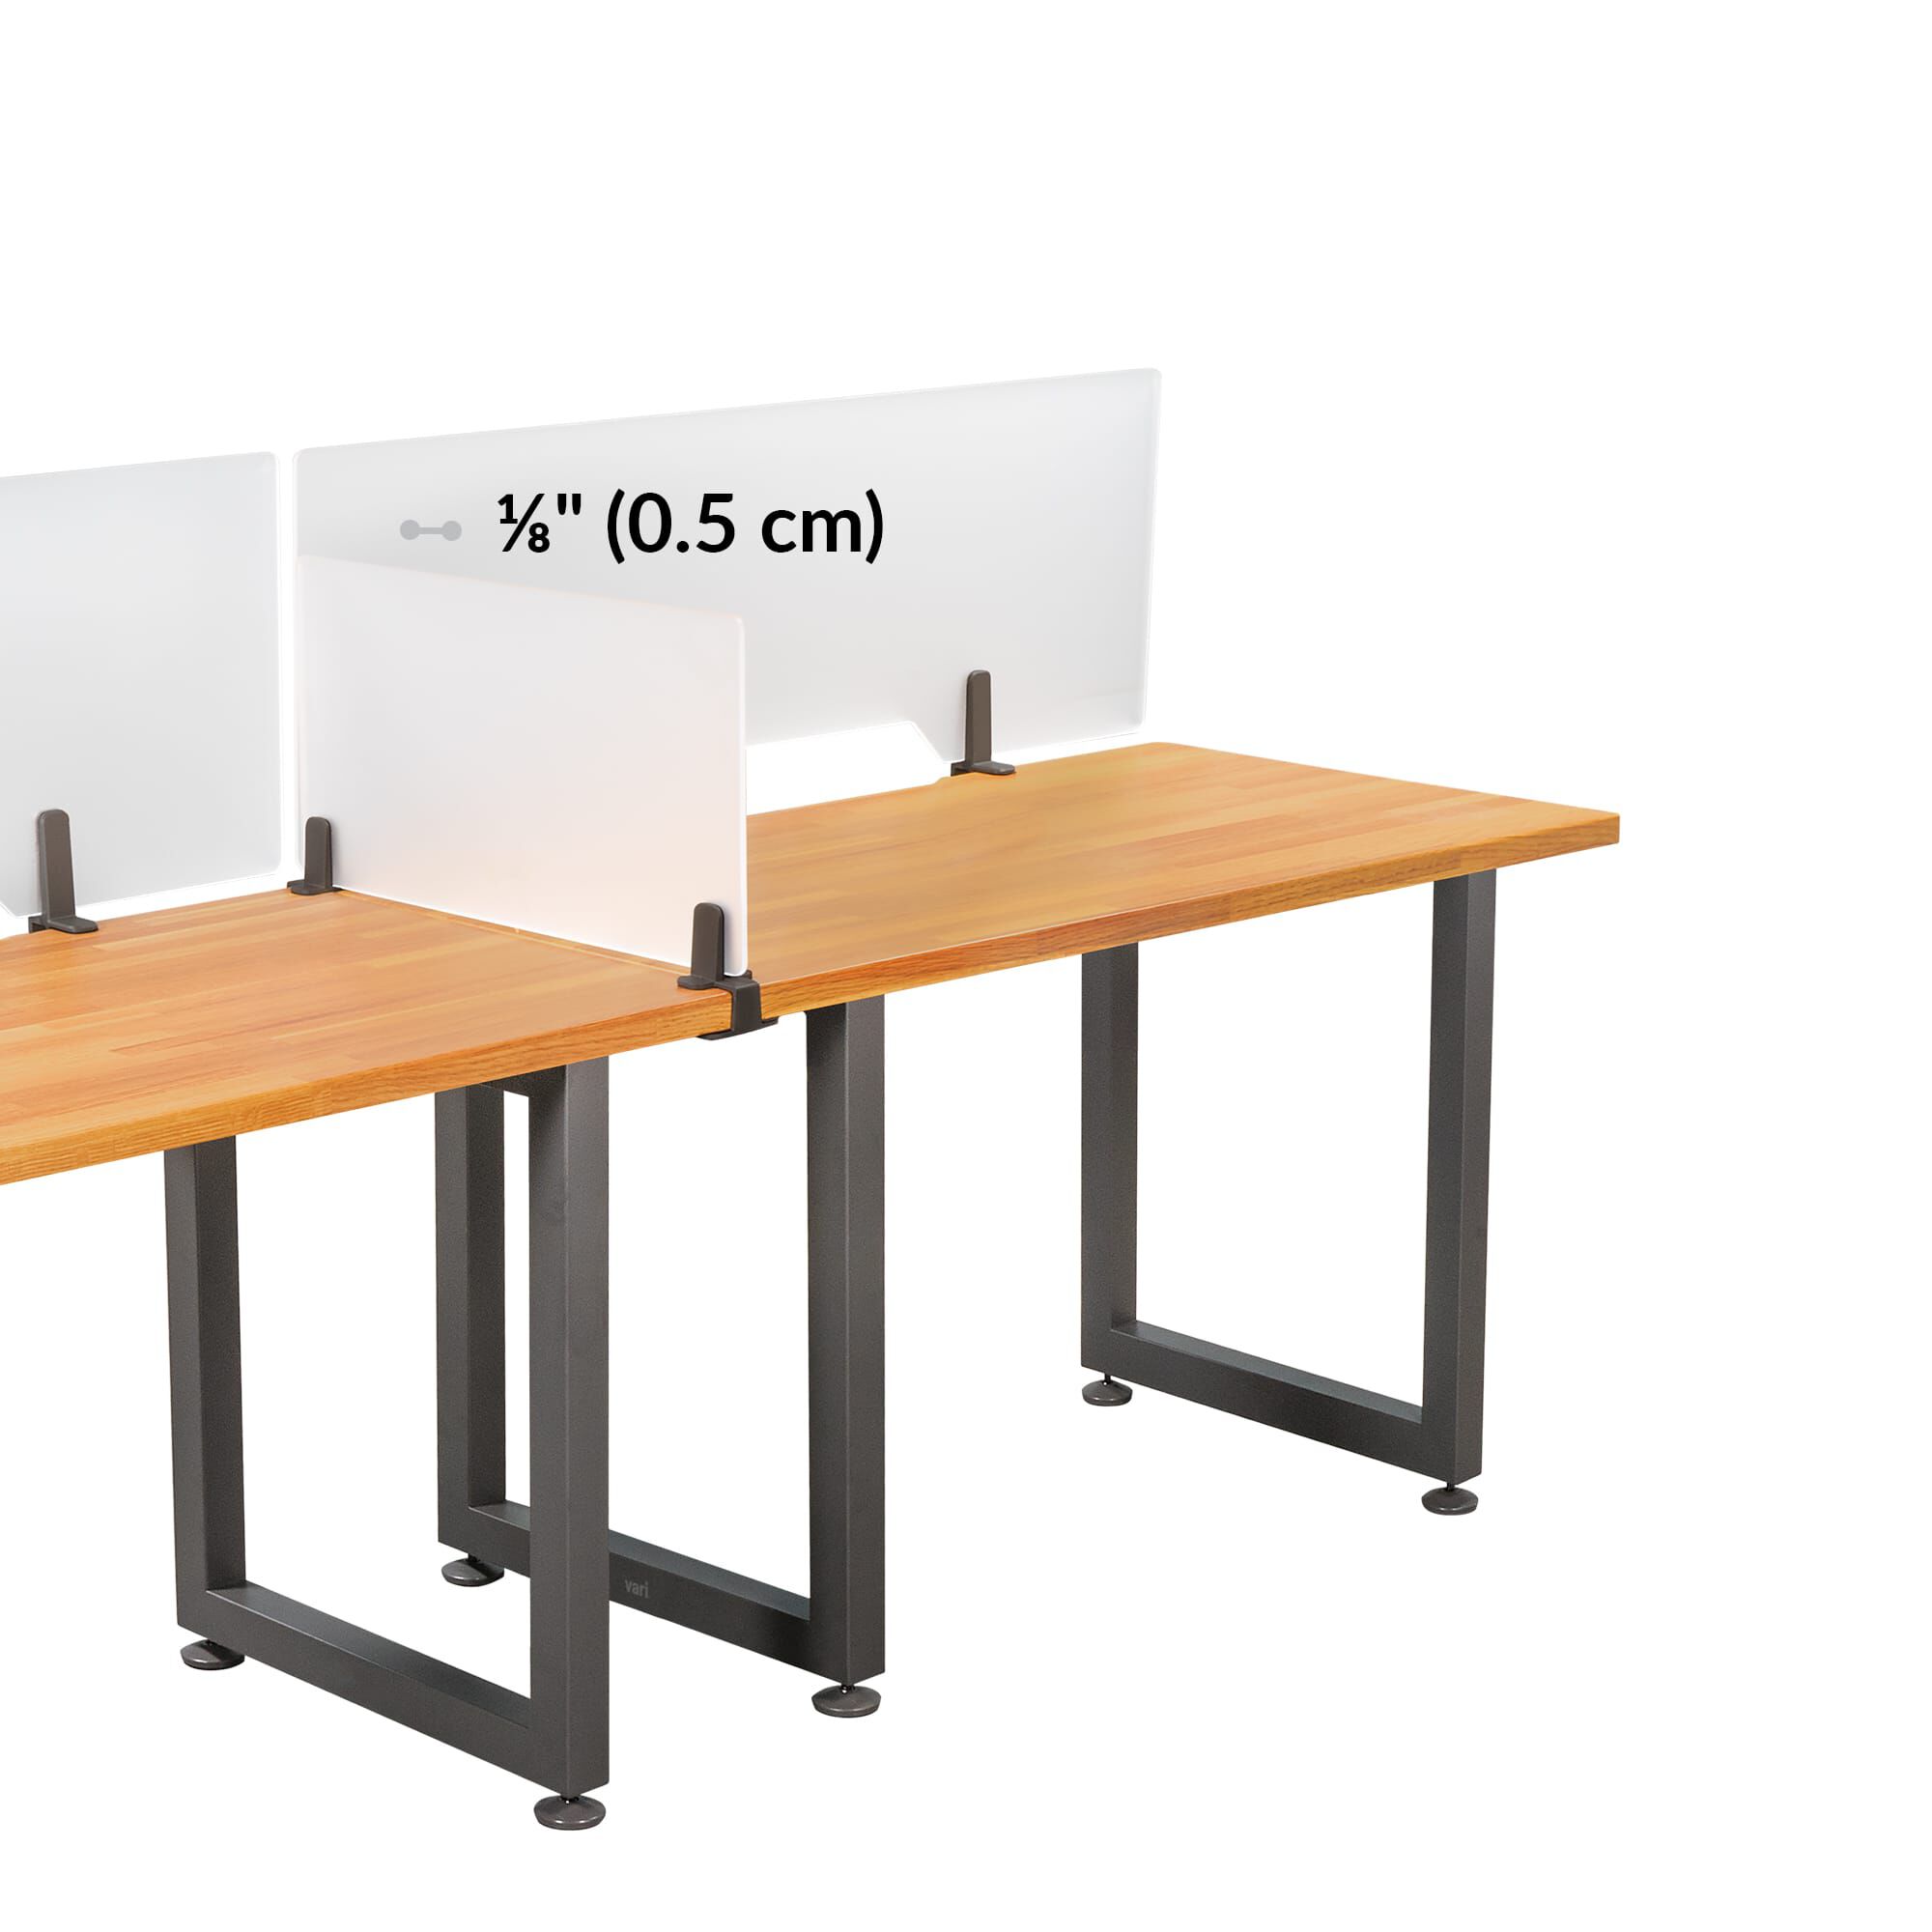 20” L×16” W Acrylic Table Privacy Board w Clips Clamp Office Drawer Dual Frosted Desk Dividers Panel Plexiglass Desktop Partitions for Students 